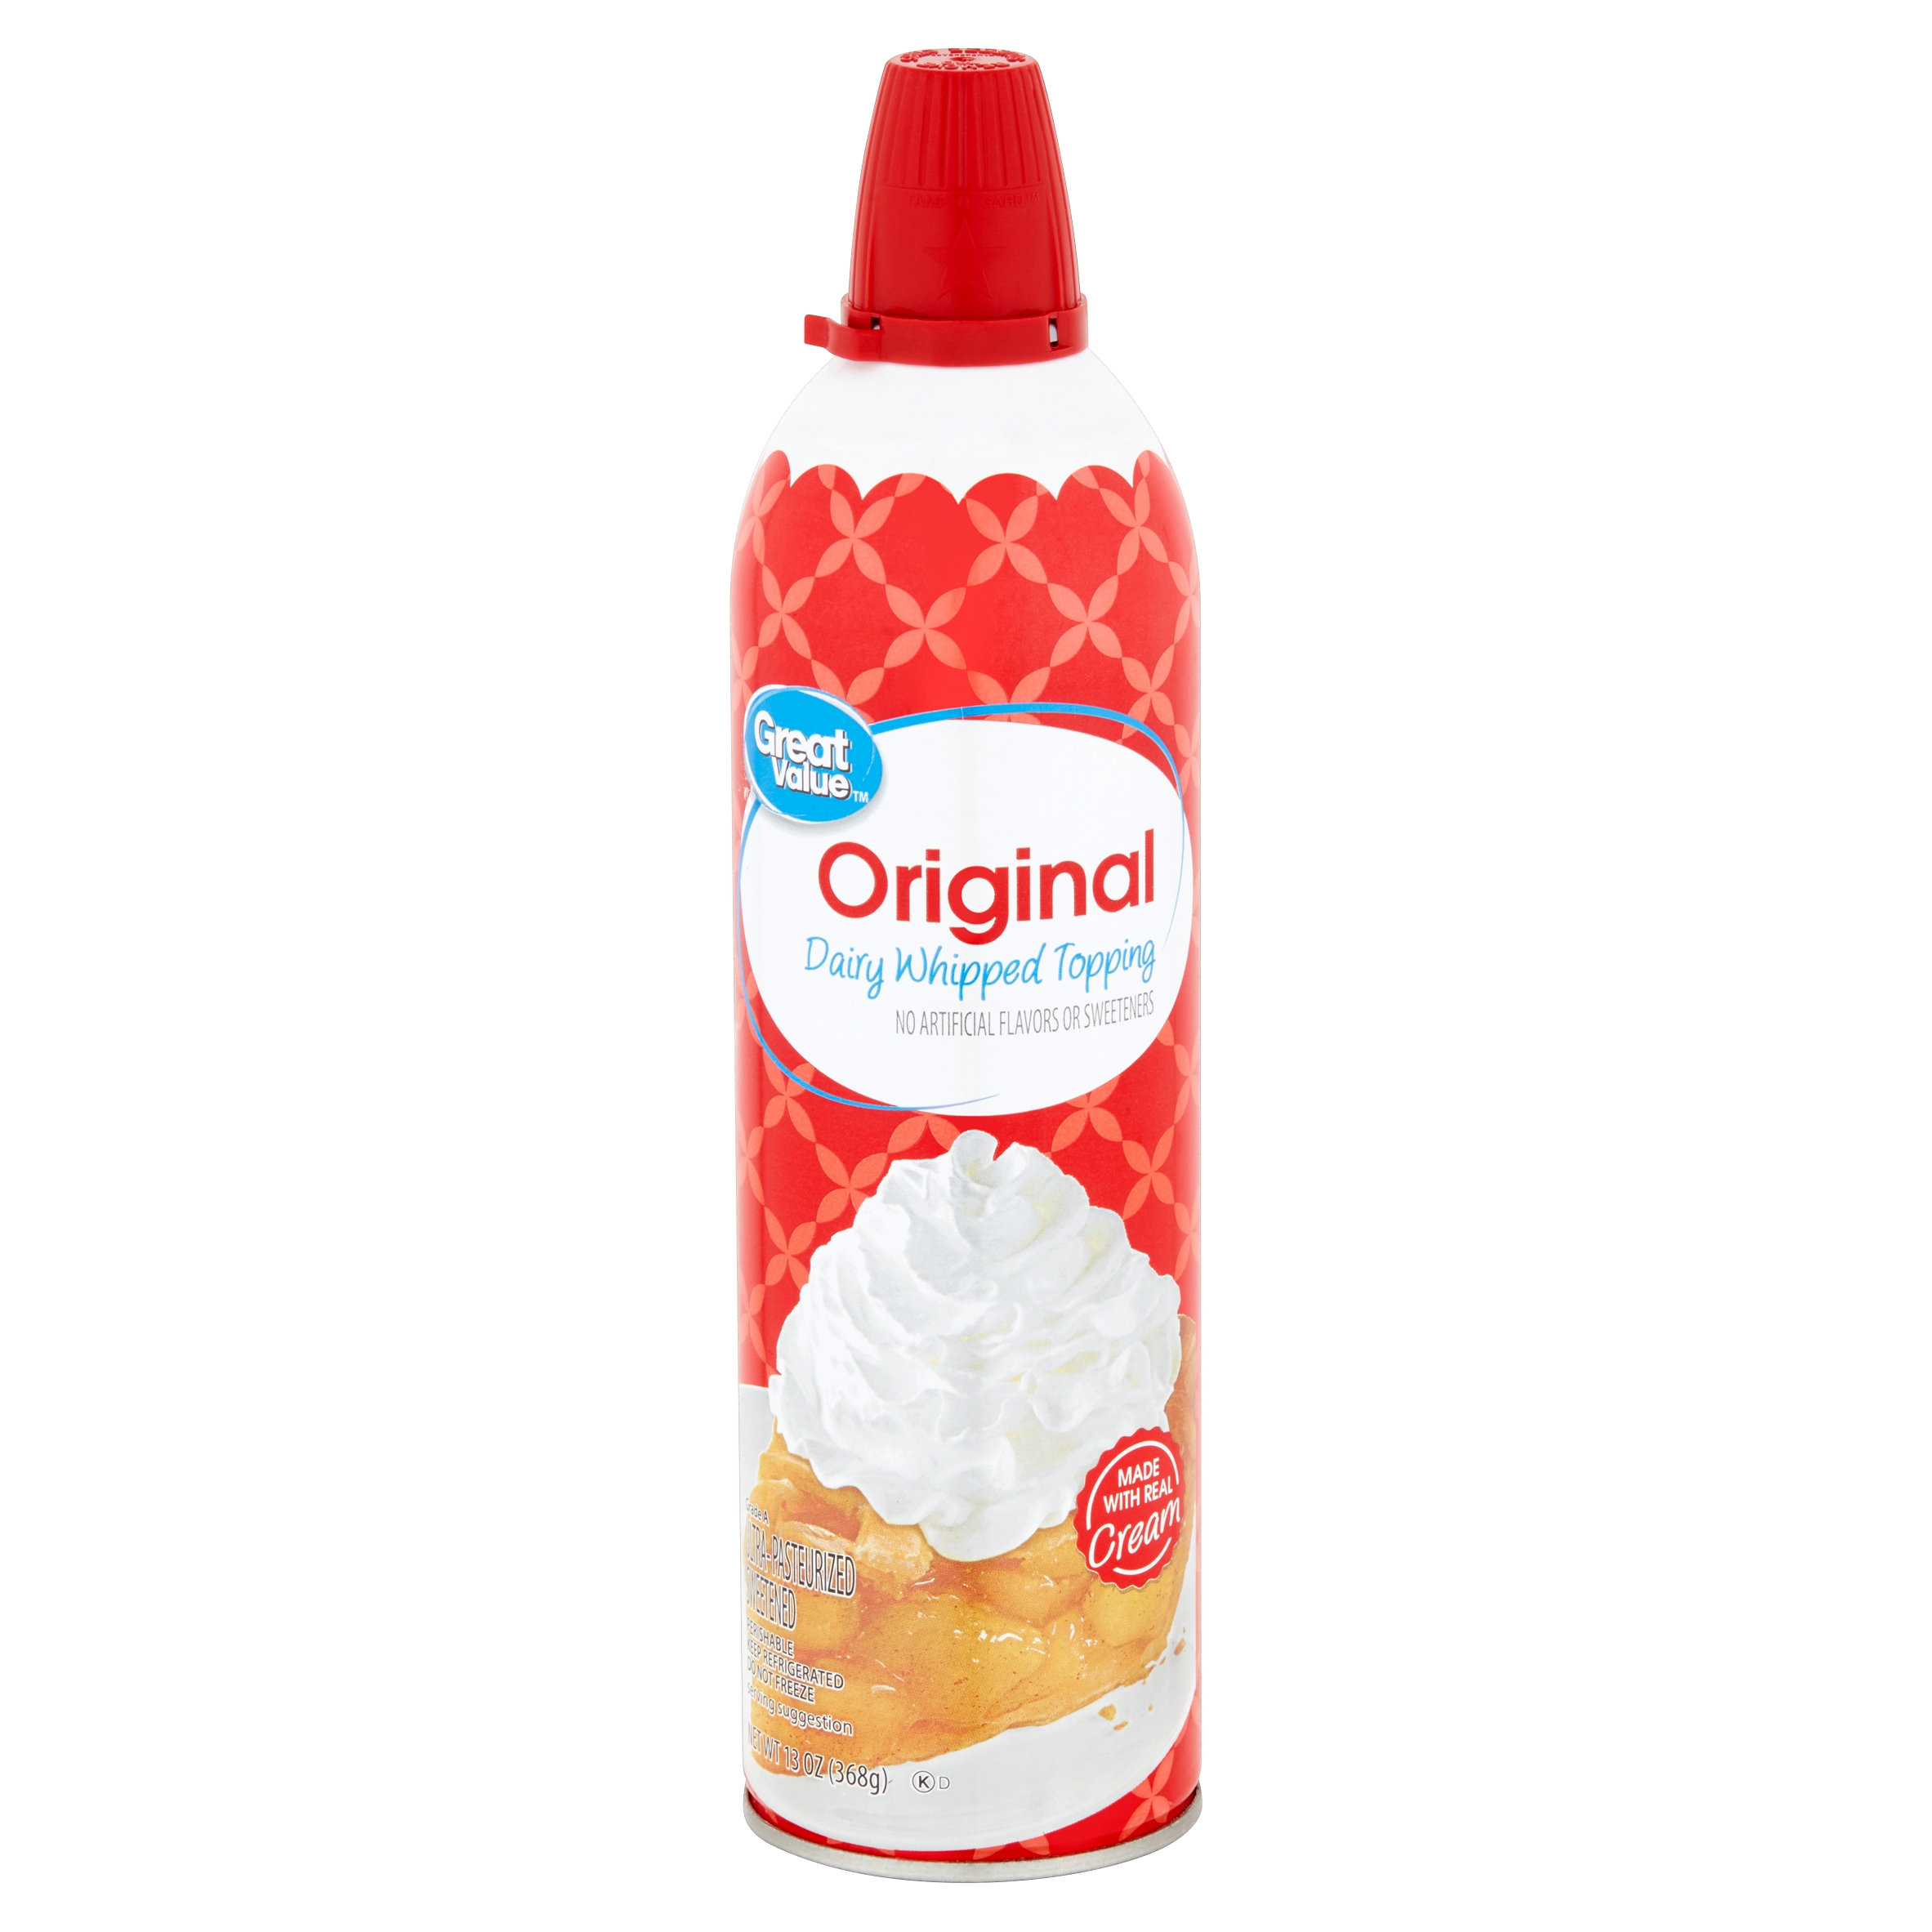 Great Value Original Dairy Whipped Topping, 13 Oz Image